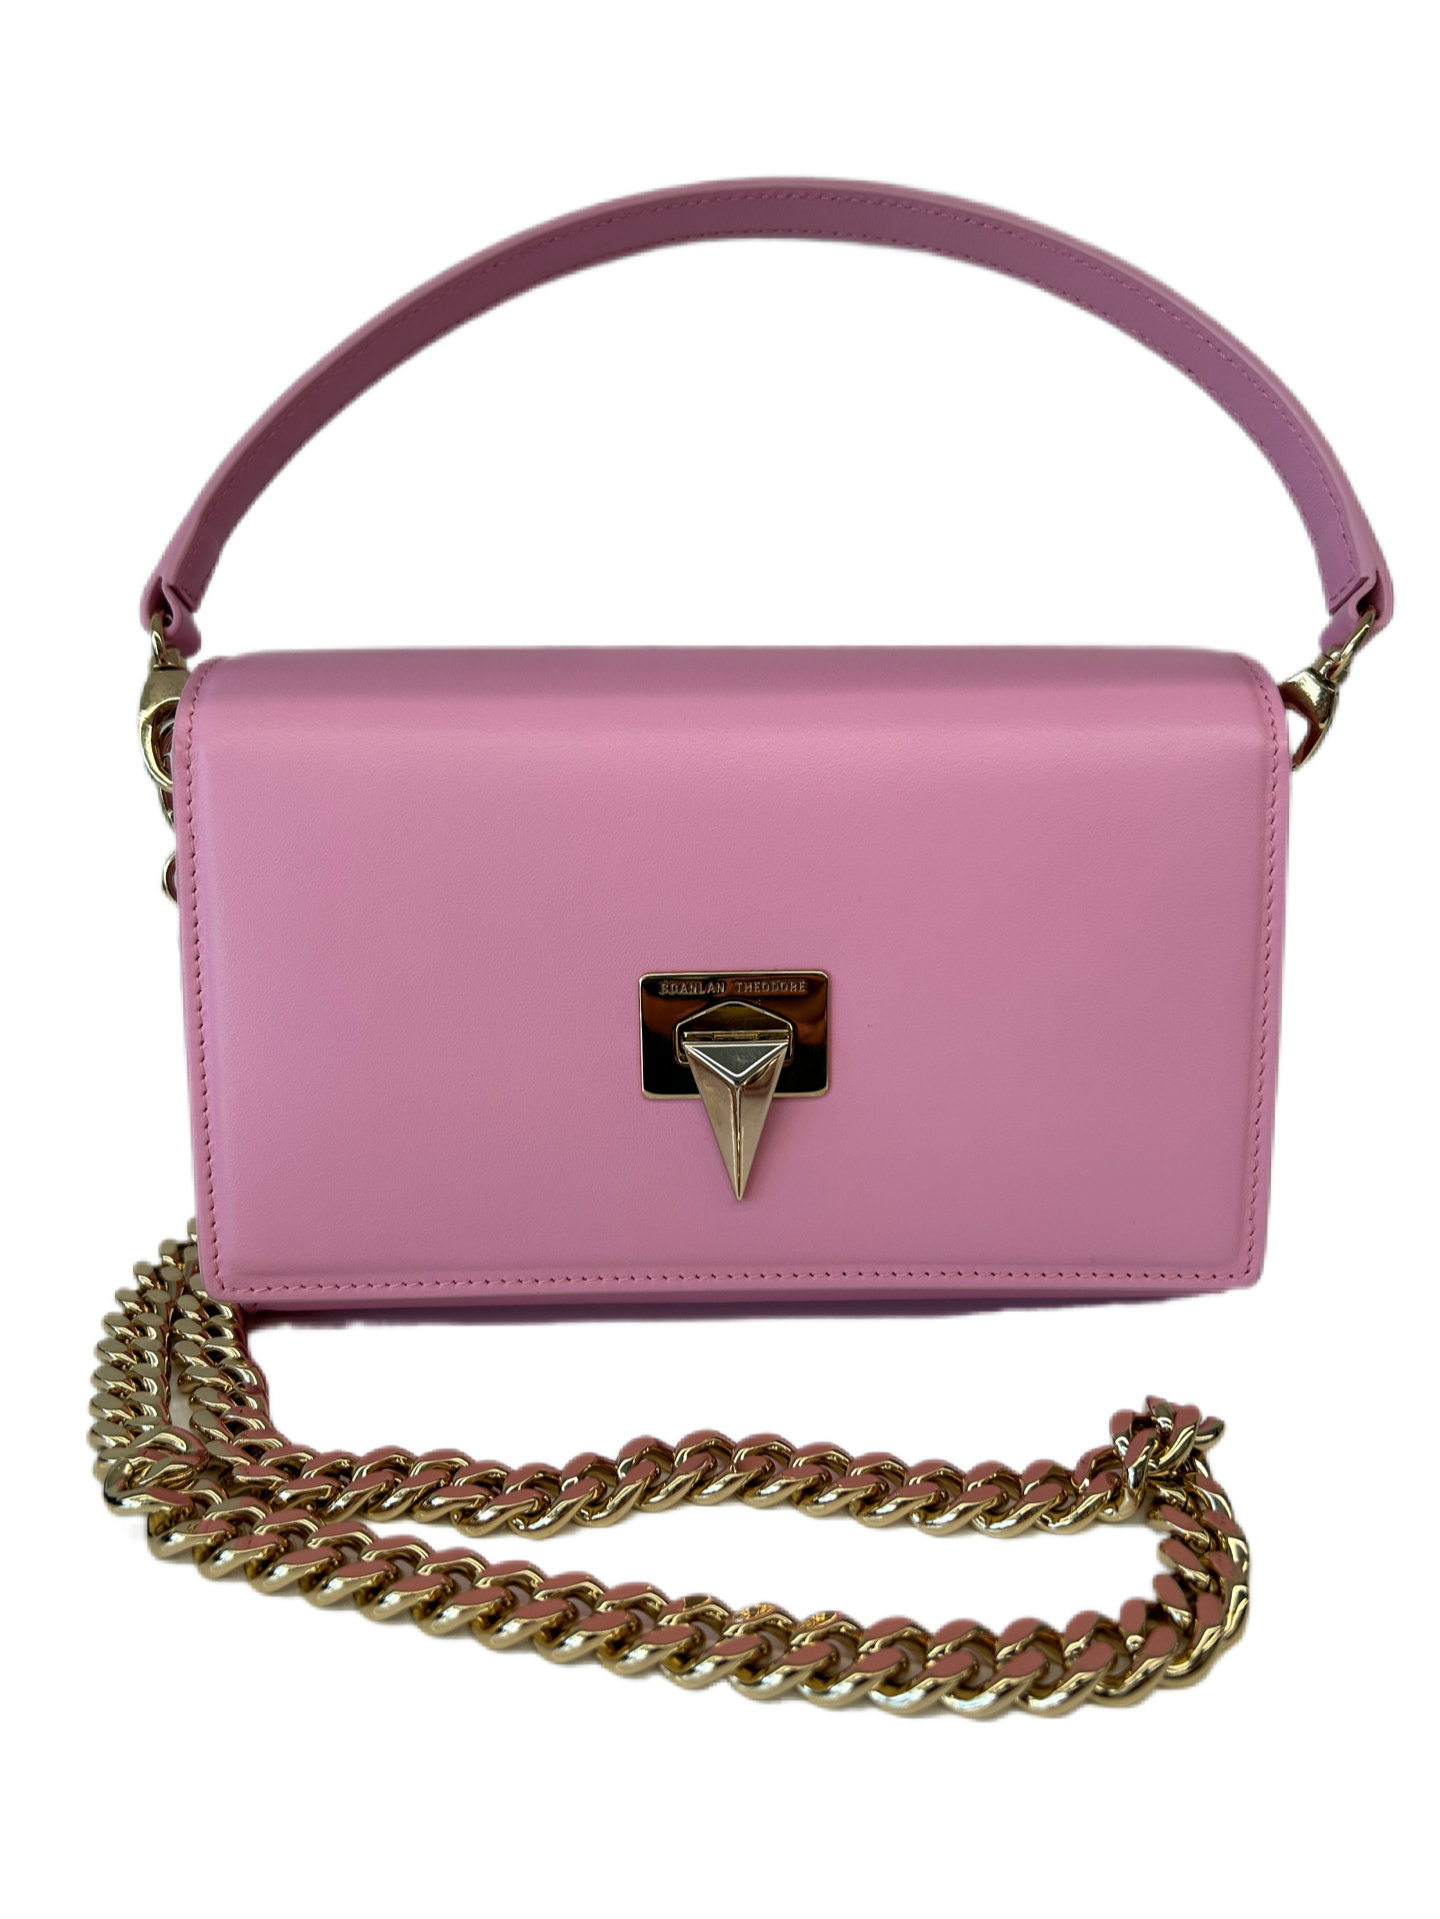 Scanlan Theodore Triangle Chain Pale Pink Bag